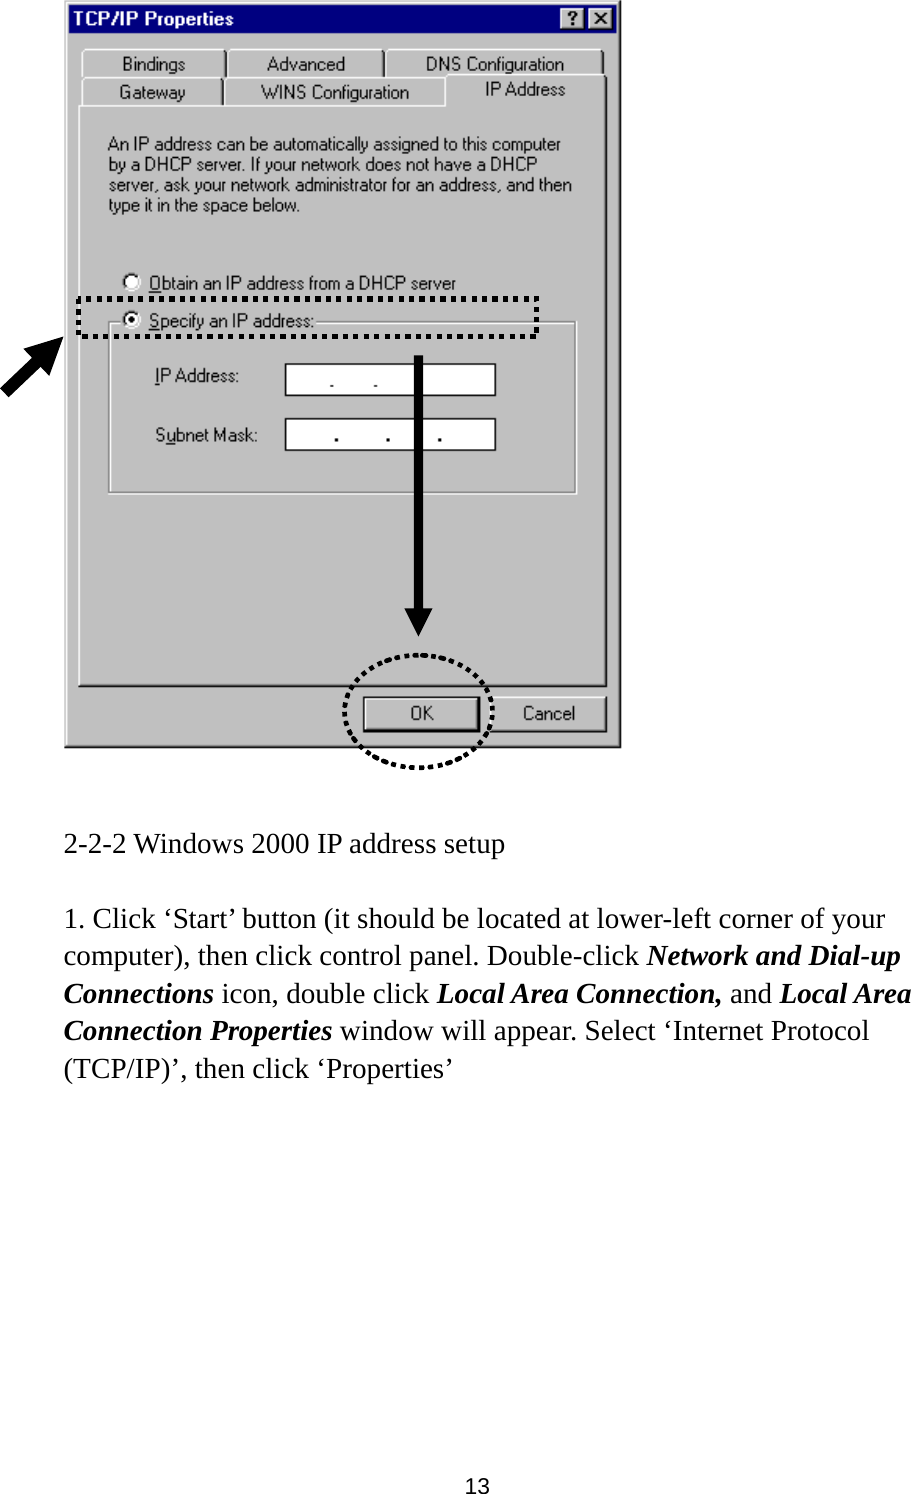 13    2-2-2 Windows 2000 IP address setup  1. Click ‘Start’ button (it should be located at lower-left corner of your computer), then click control panel. Double-click Network and Dial-up Connections icon, double click Local Area Connection, and Local Area Connection Properties window will appear. Select ‘Internet Protocol (TCP/IP)’, then click ‘Properties’    